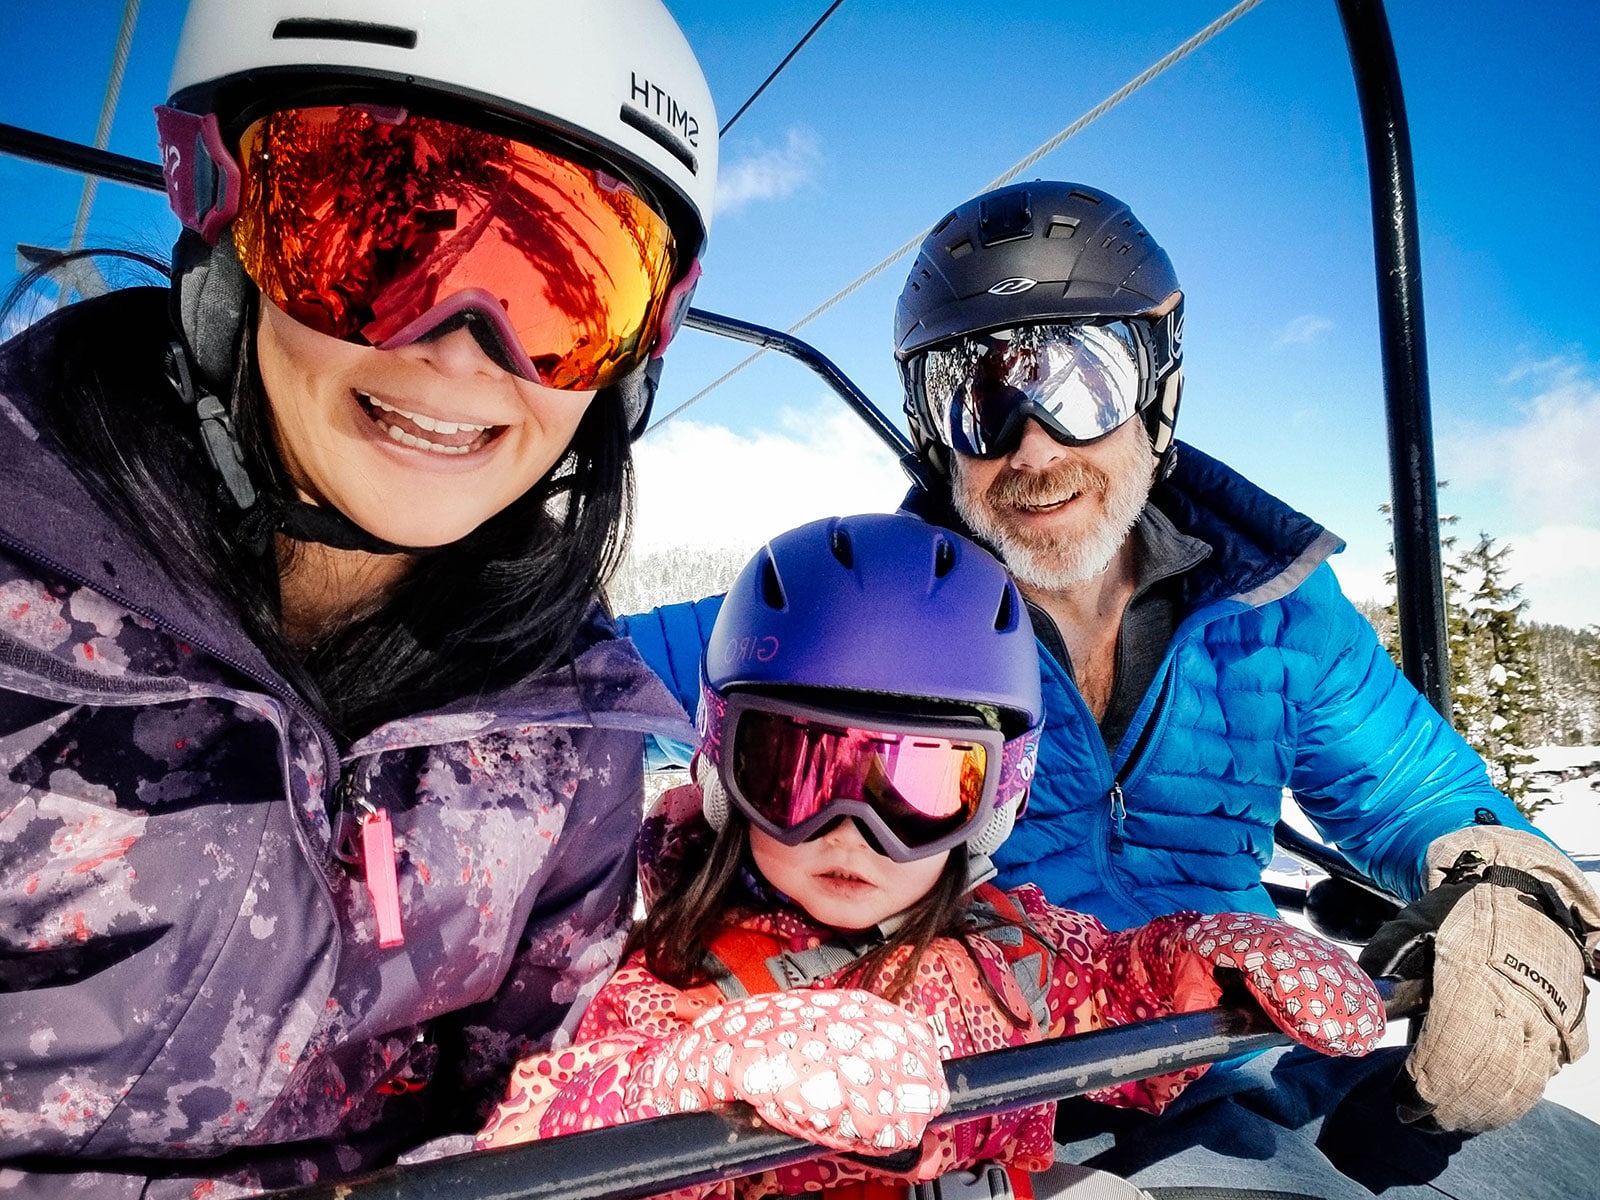 Mom and Dad riding a chairlift with a toddler